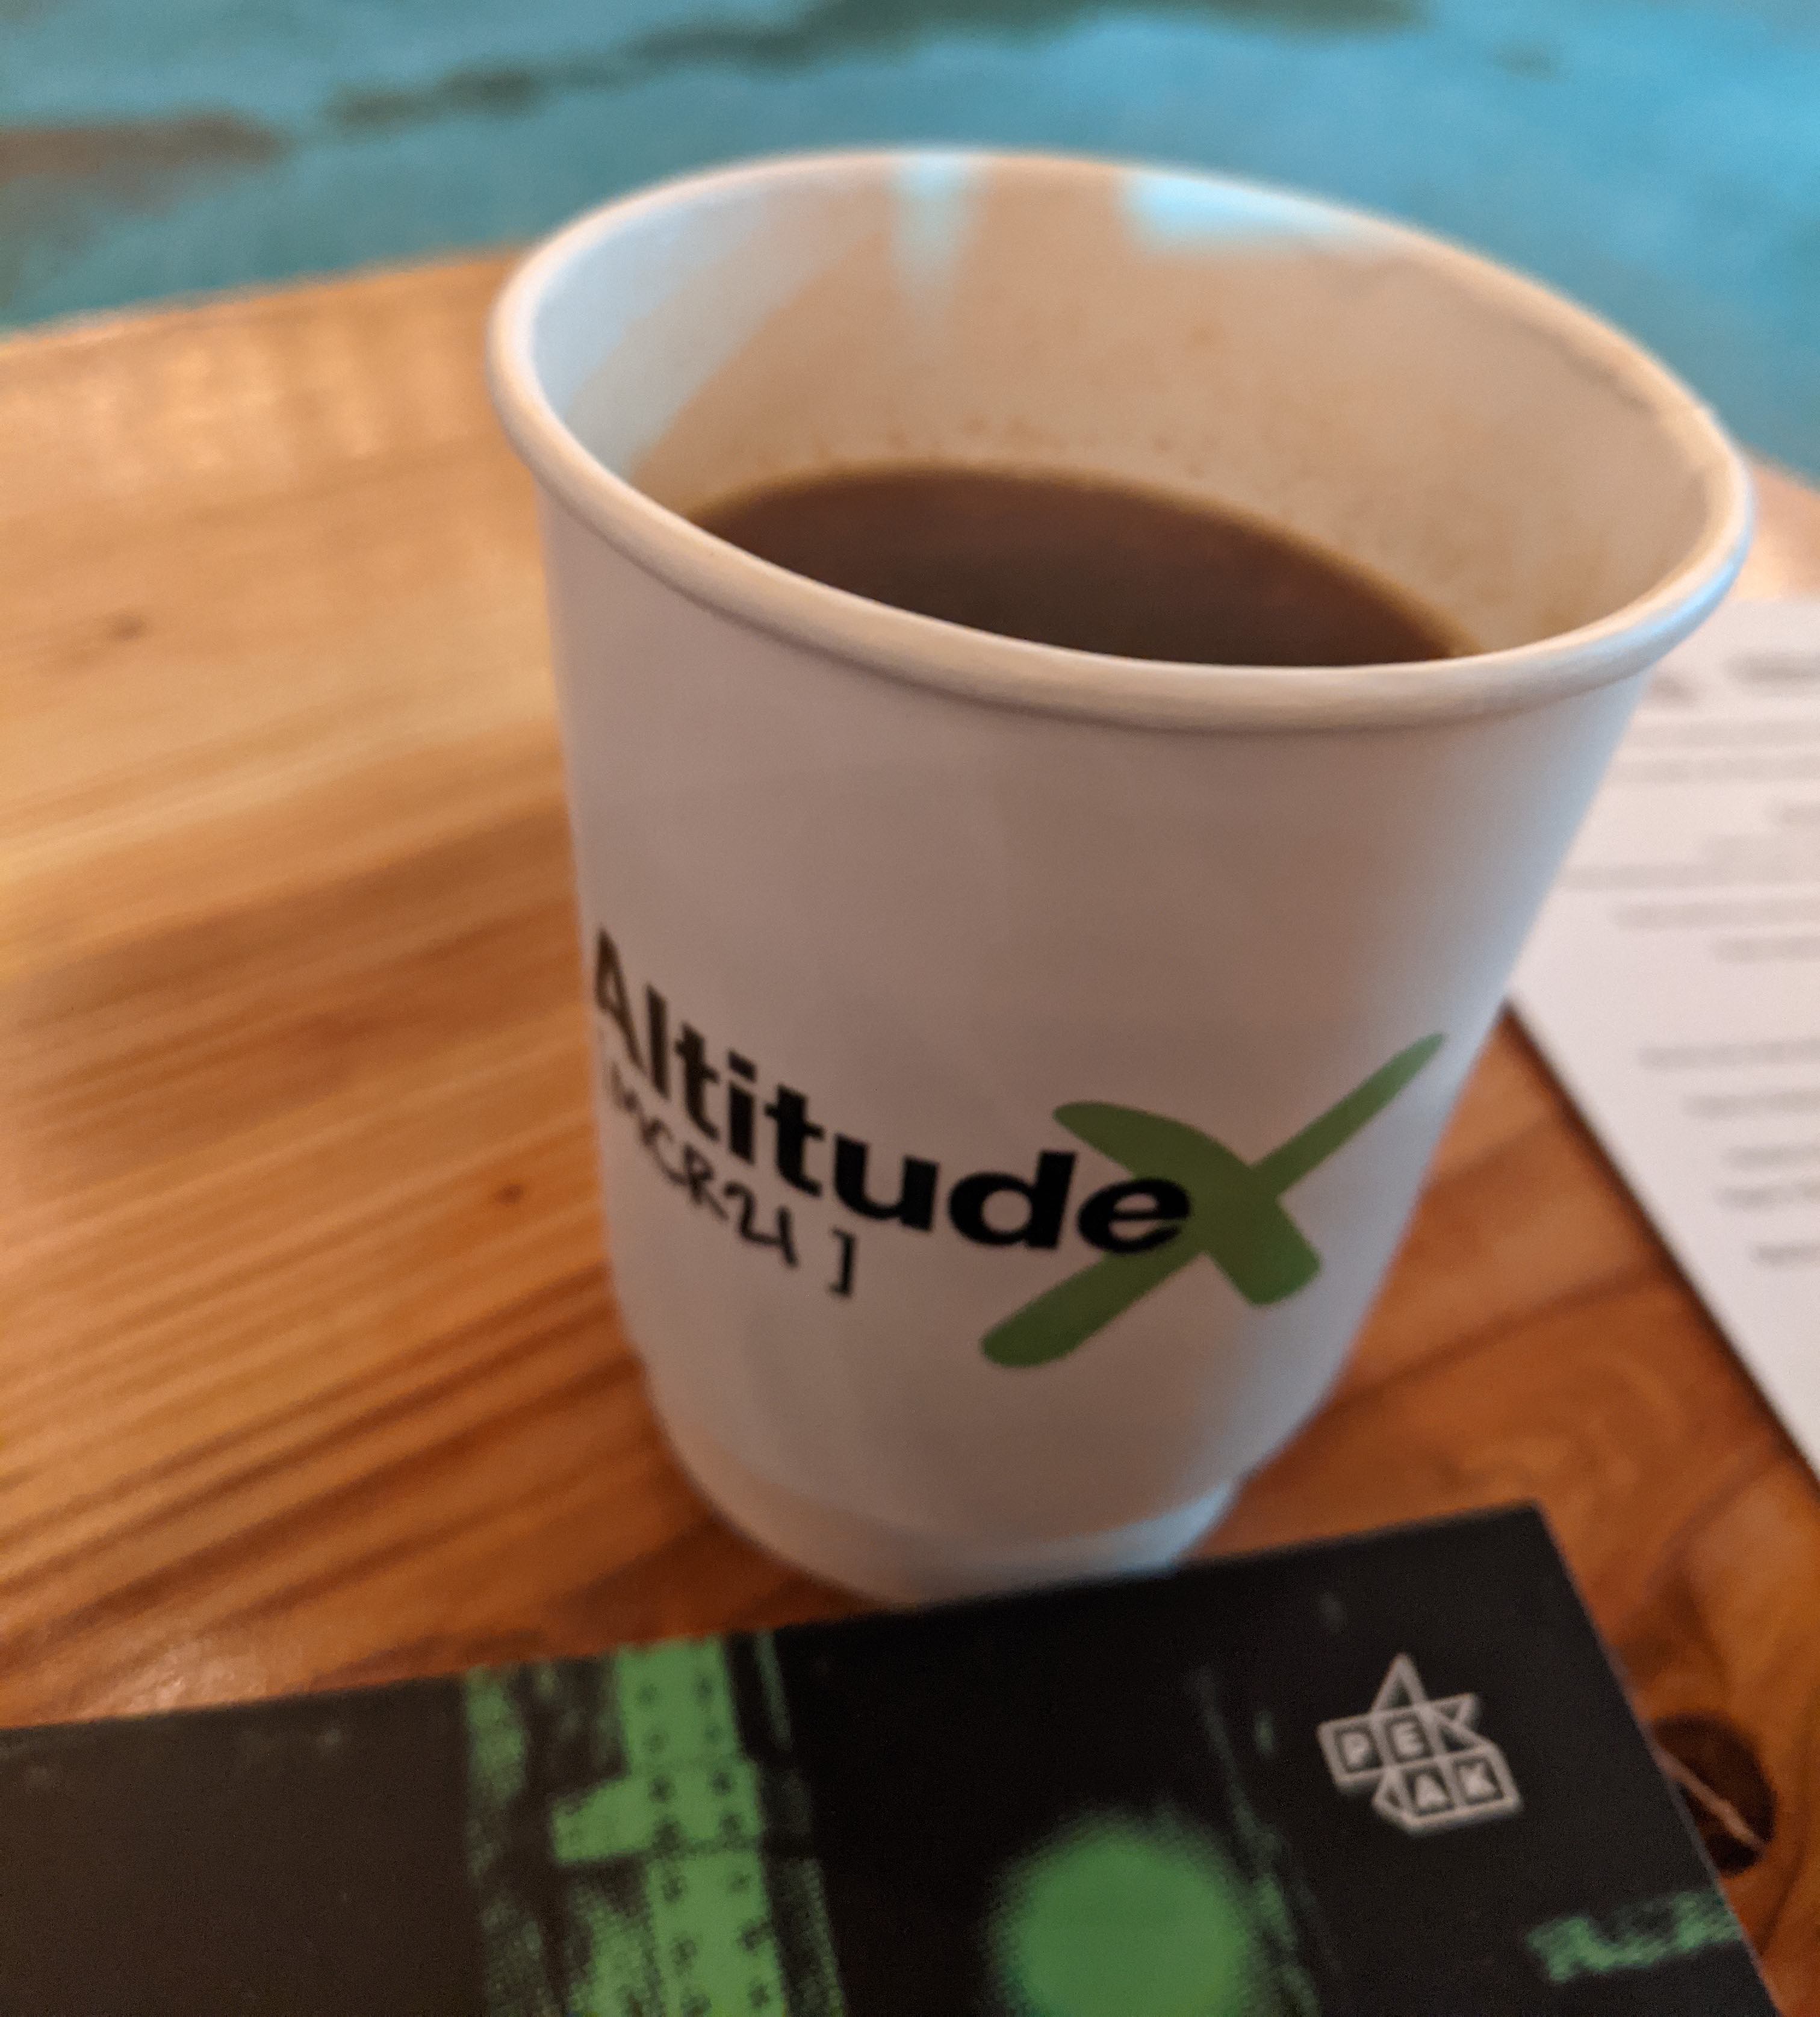 First conference coffee since 2019!